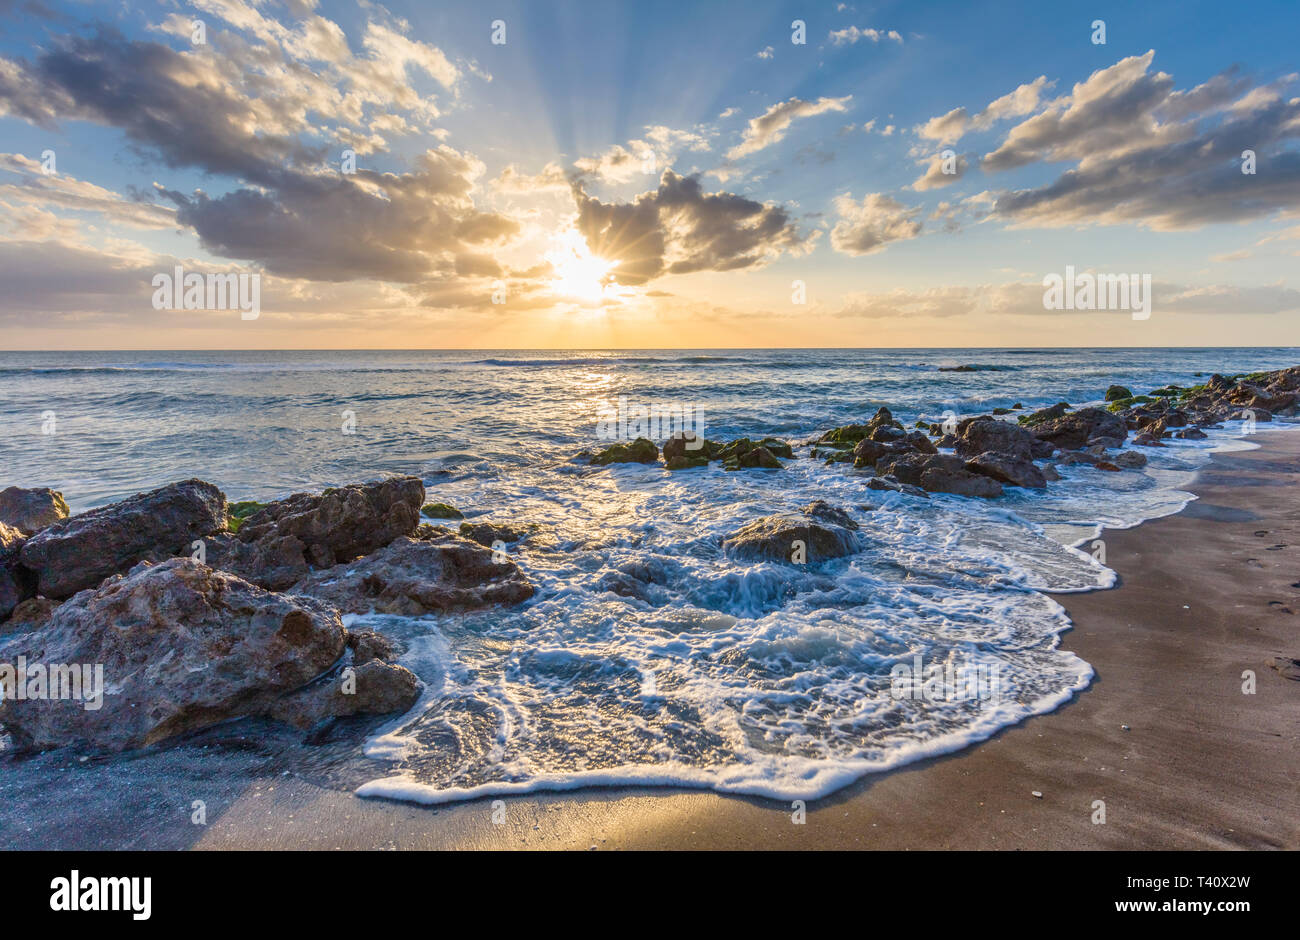 Sunset over the rocky shore of the Gulf of Mexico at Caspersen Beach in Venice Florida Stock Photo